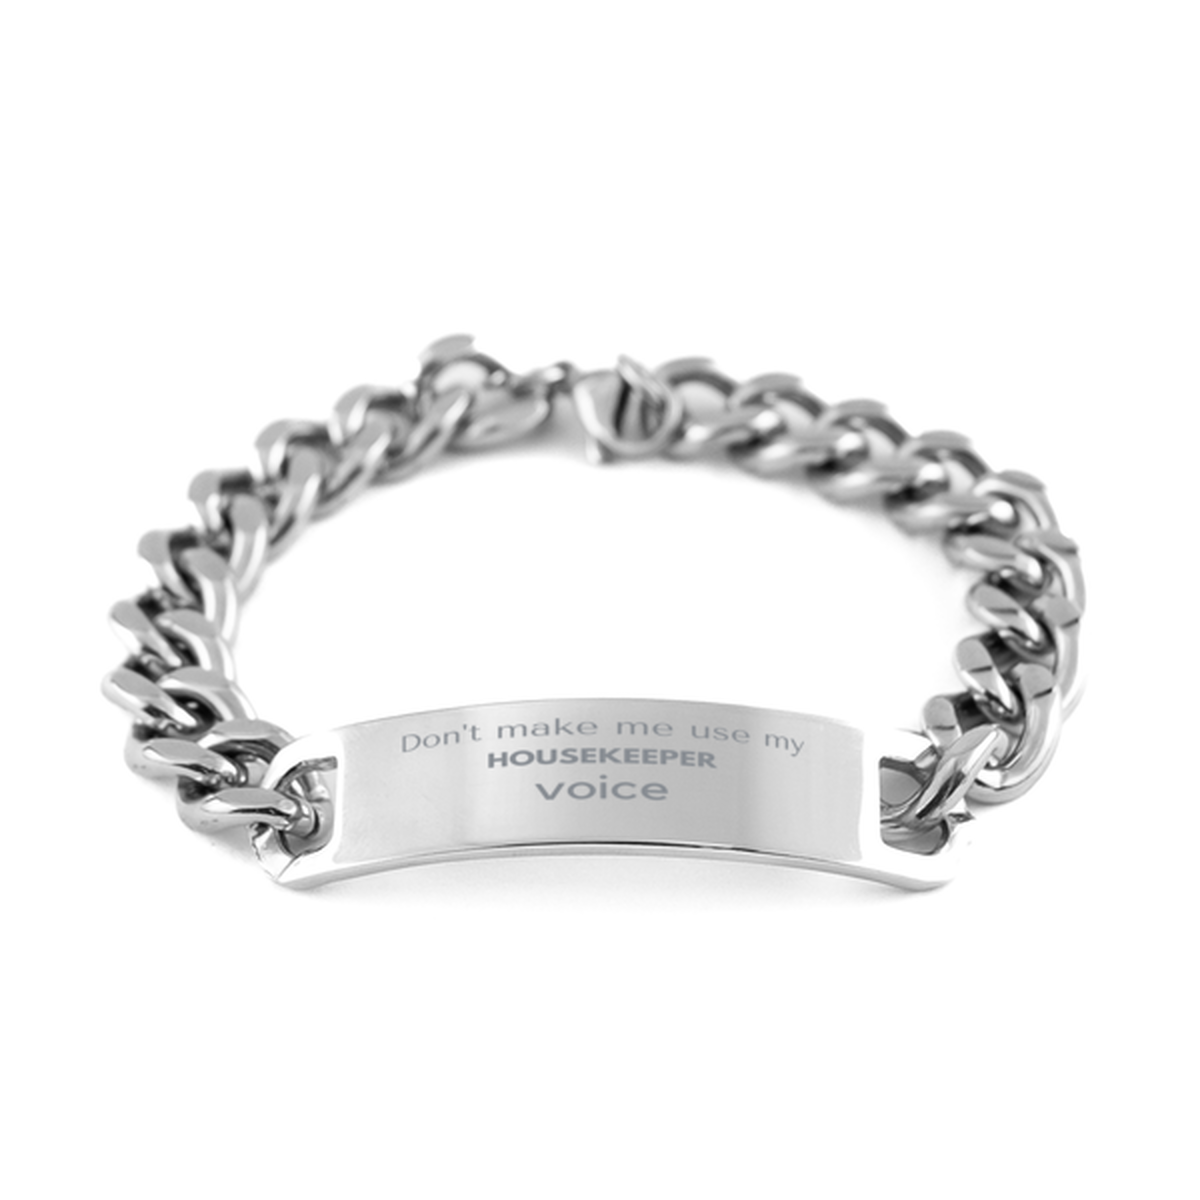 Don't make me use my Housekeeper voice, Sarcasm Housekeeper Gifts, Christmas Housekeeper Cuban Chain Stainless Steel Bracelet Birthday Unique Gifts For Housekeeper Coworkers, Men, Women, Colleague, Friends